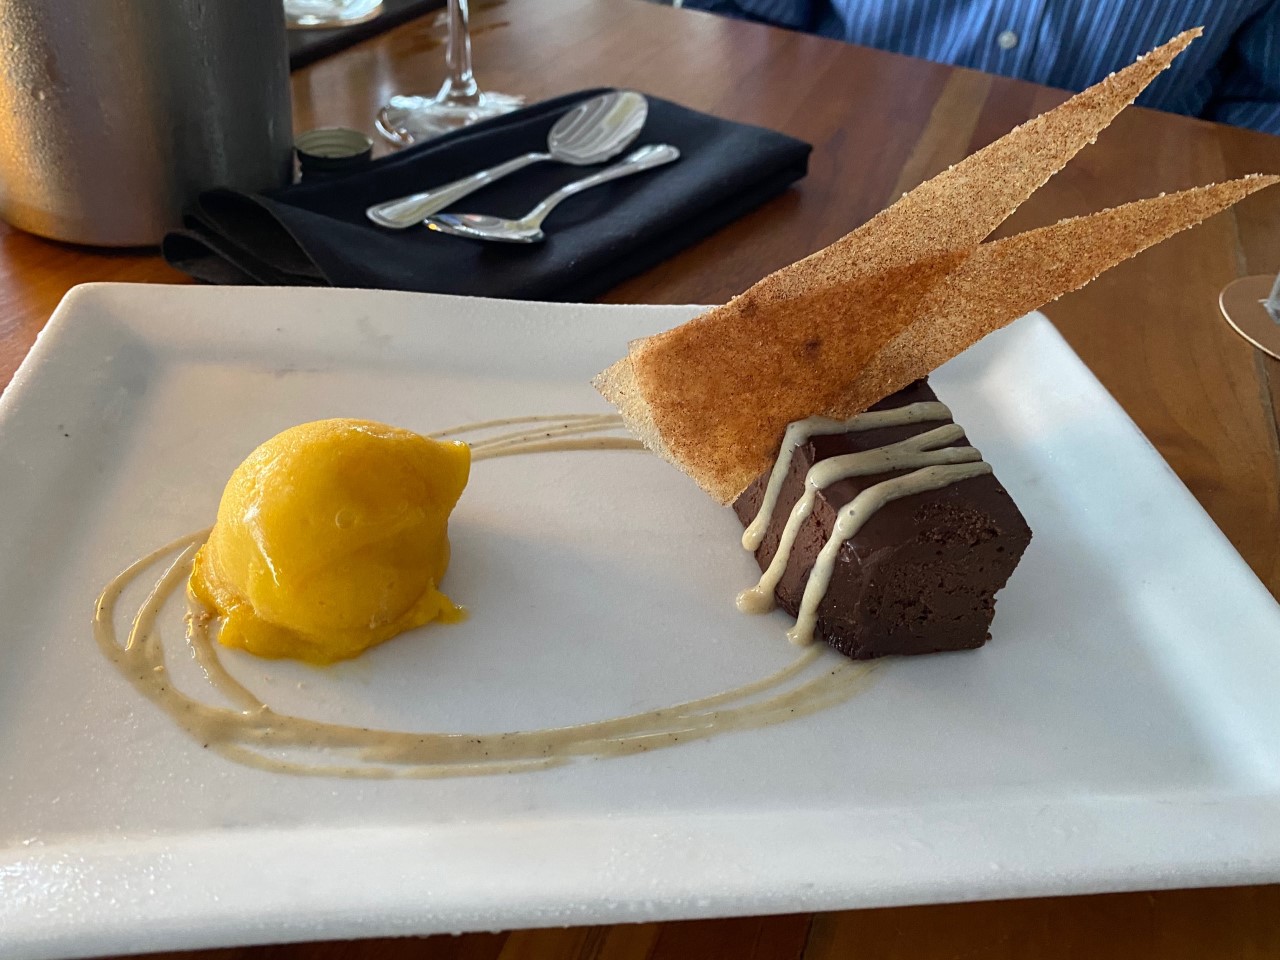 A Delectable Chocolate Dessert with Mango Ice Cream